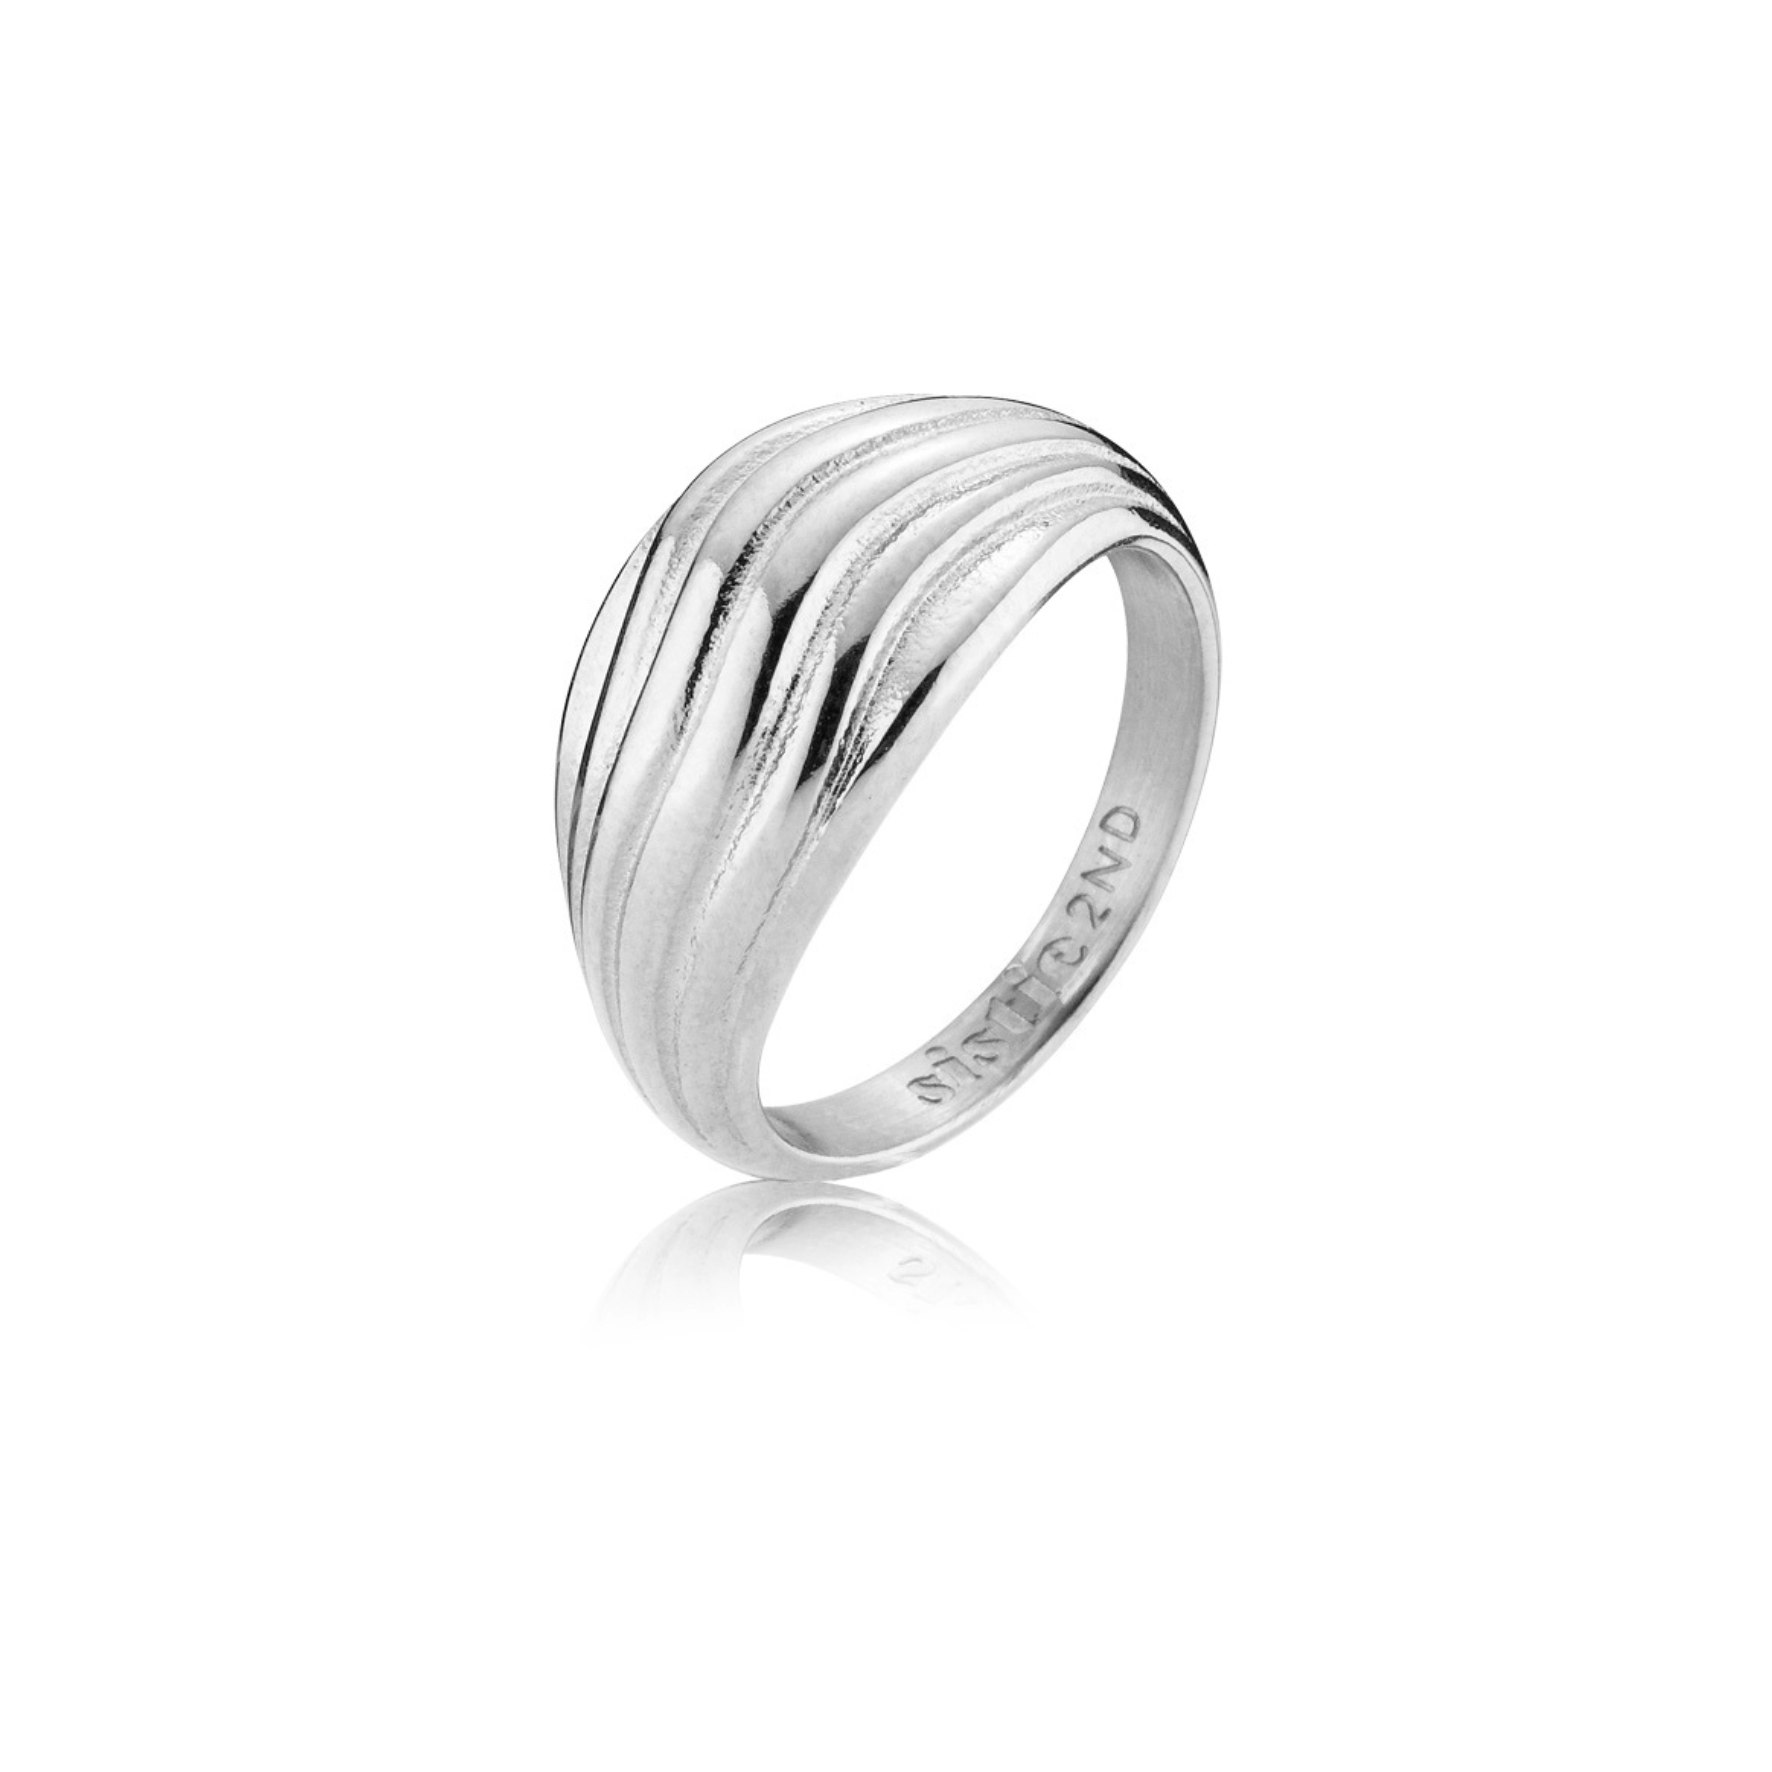 Moana Ring from Sistie 2nd in Stainless steel